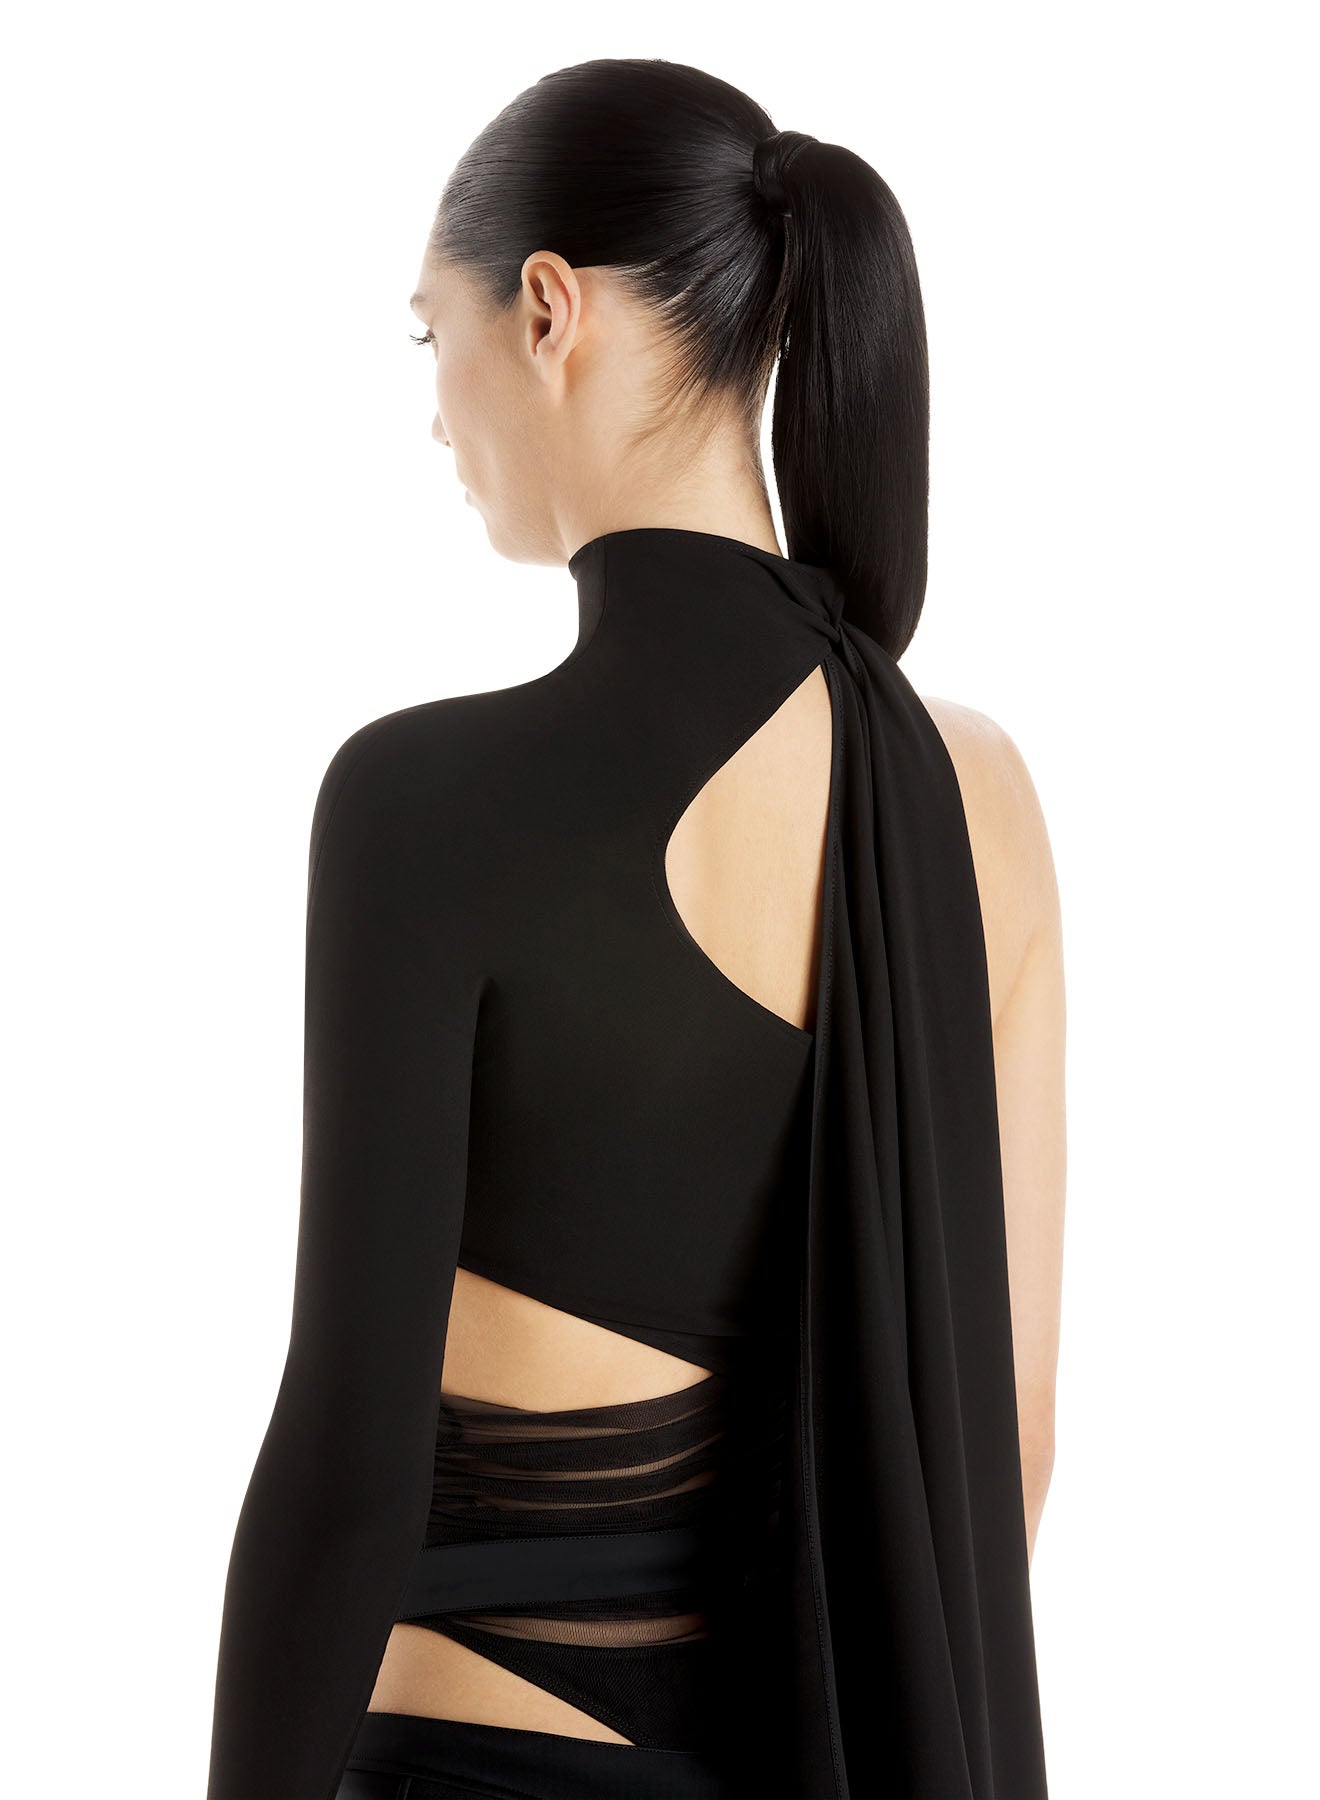 MUGLER - Cut-out BODYSUIT  HBX - Globally Curated Fashion and Lifestyle by  Hypebeast